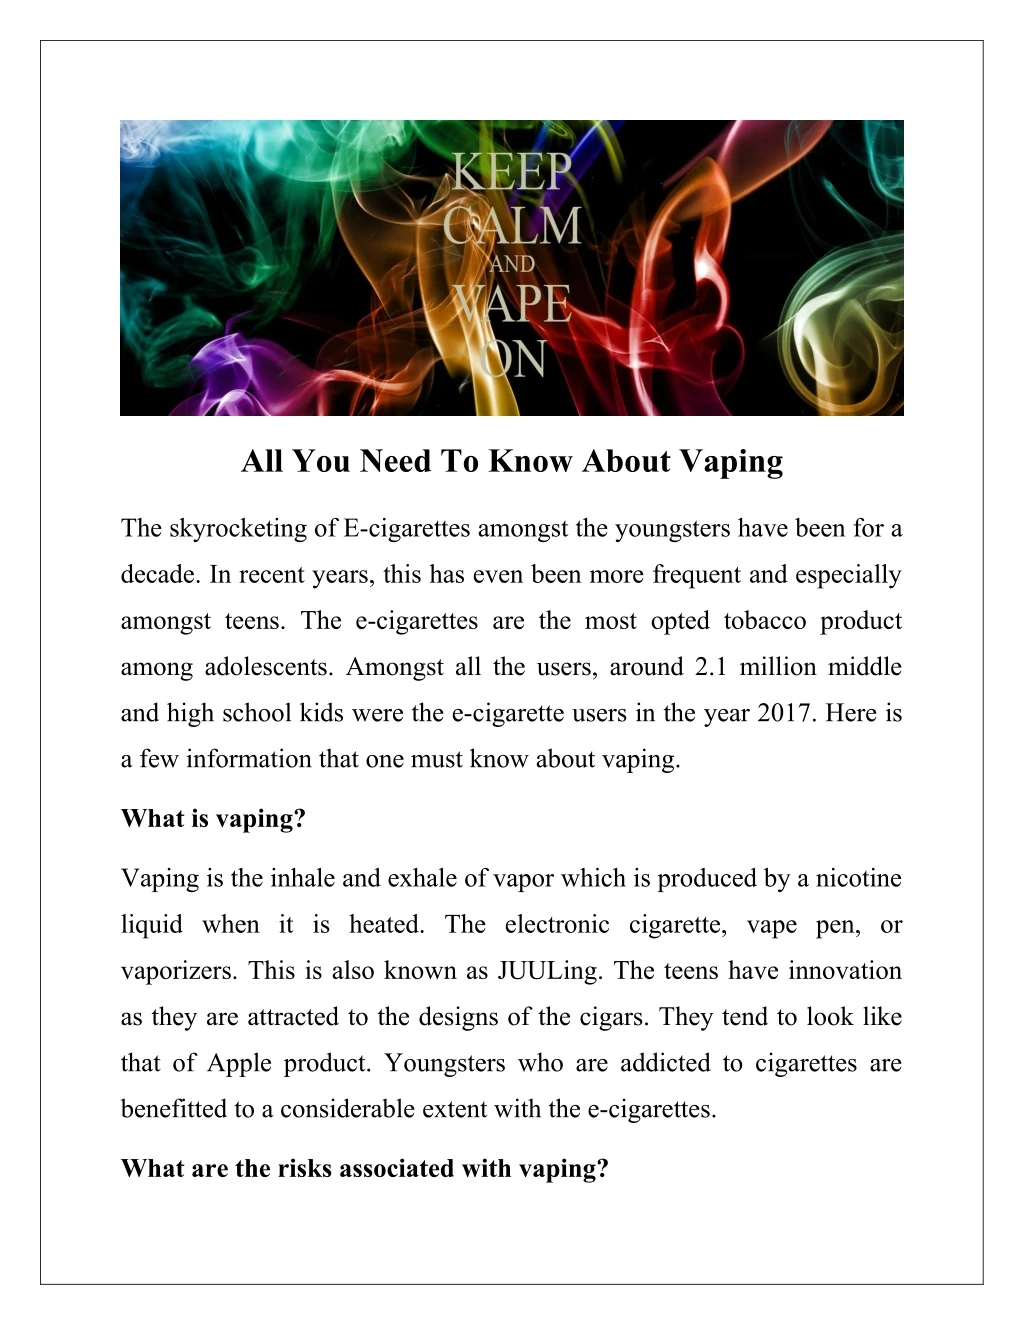 all you need to know about vaping